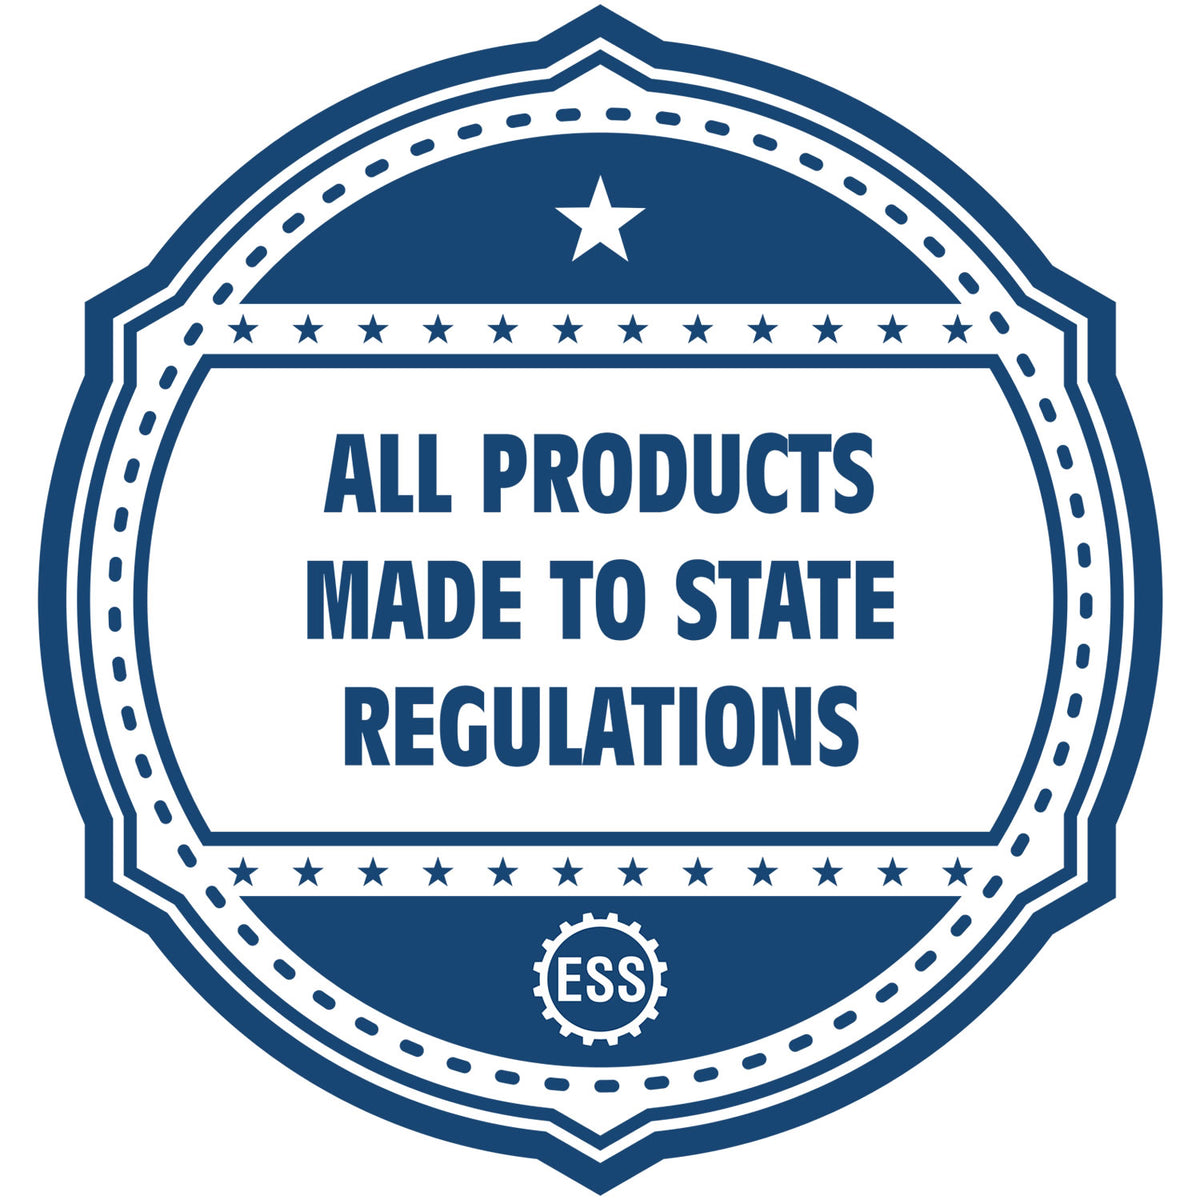 An icon or badge element for the Digital North Carolina PE Stamp and Electronic Seal for North Carolina Engineer showing that this product is made in compliance with state regulations.